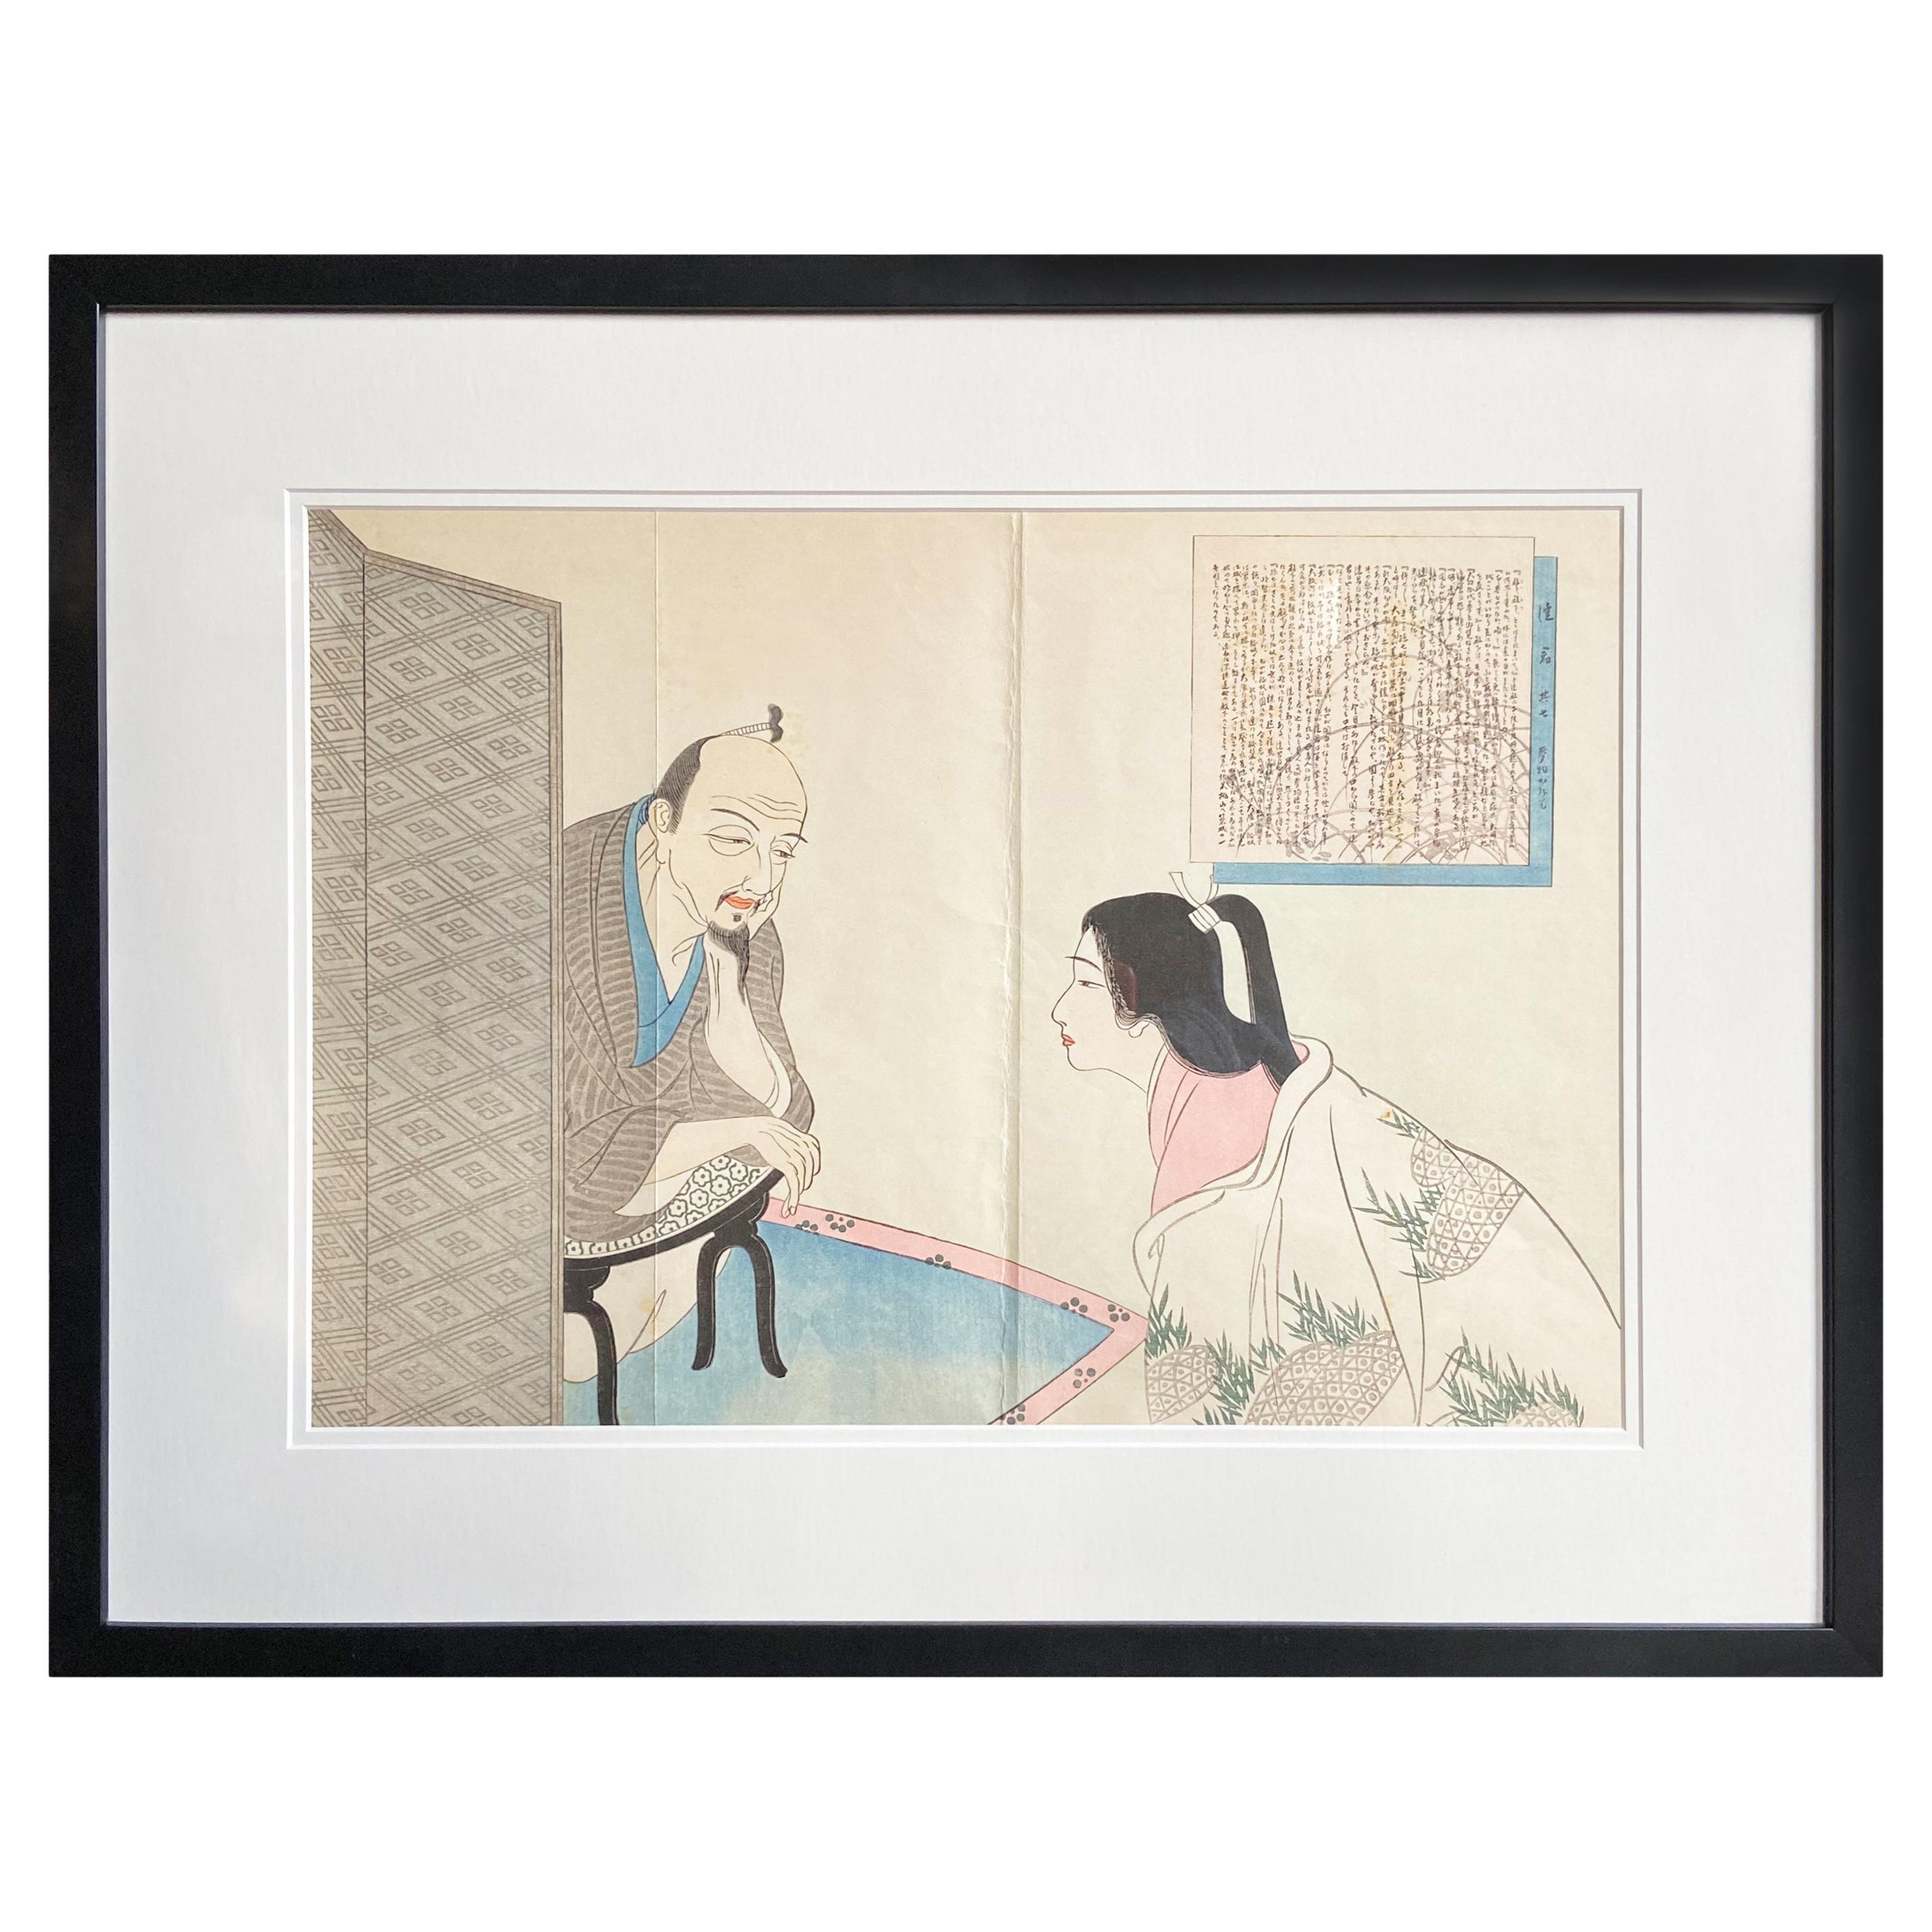 Antique Japanese Framed Woodblock Print Depicting a Man and Woman Discussing